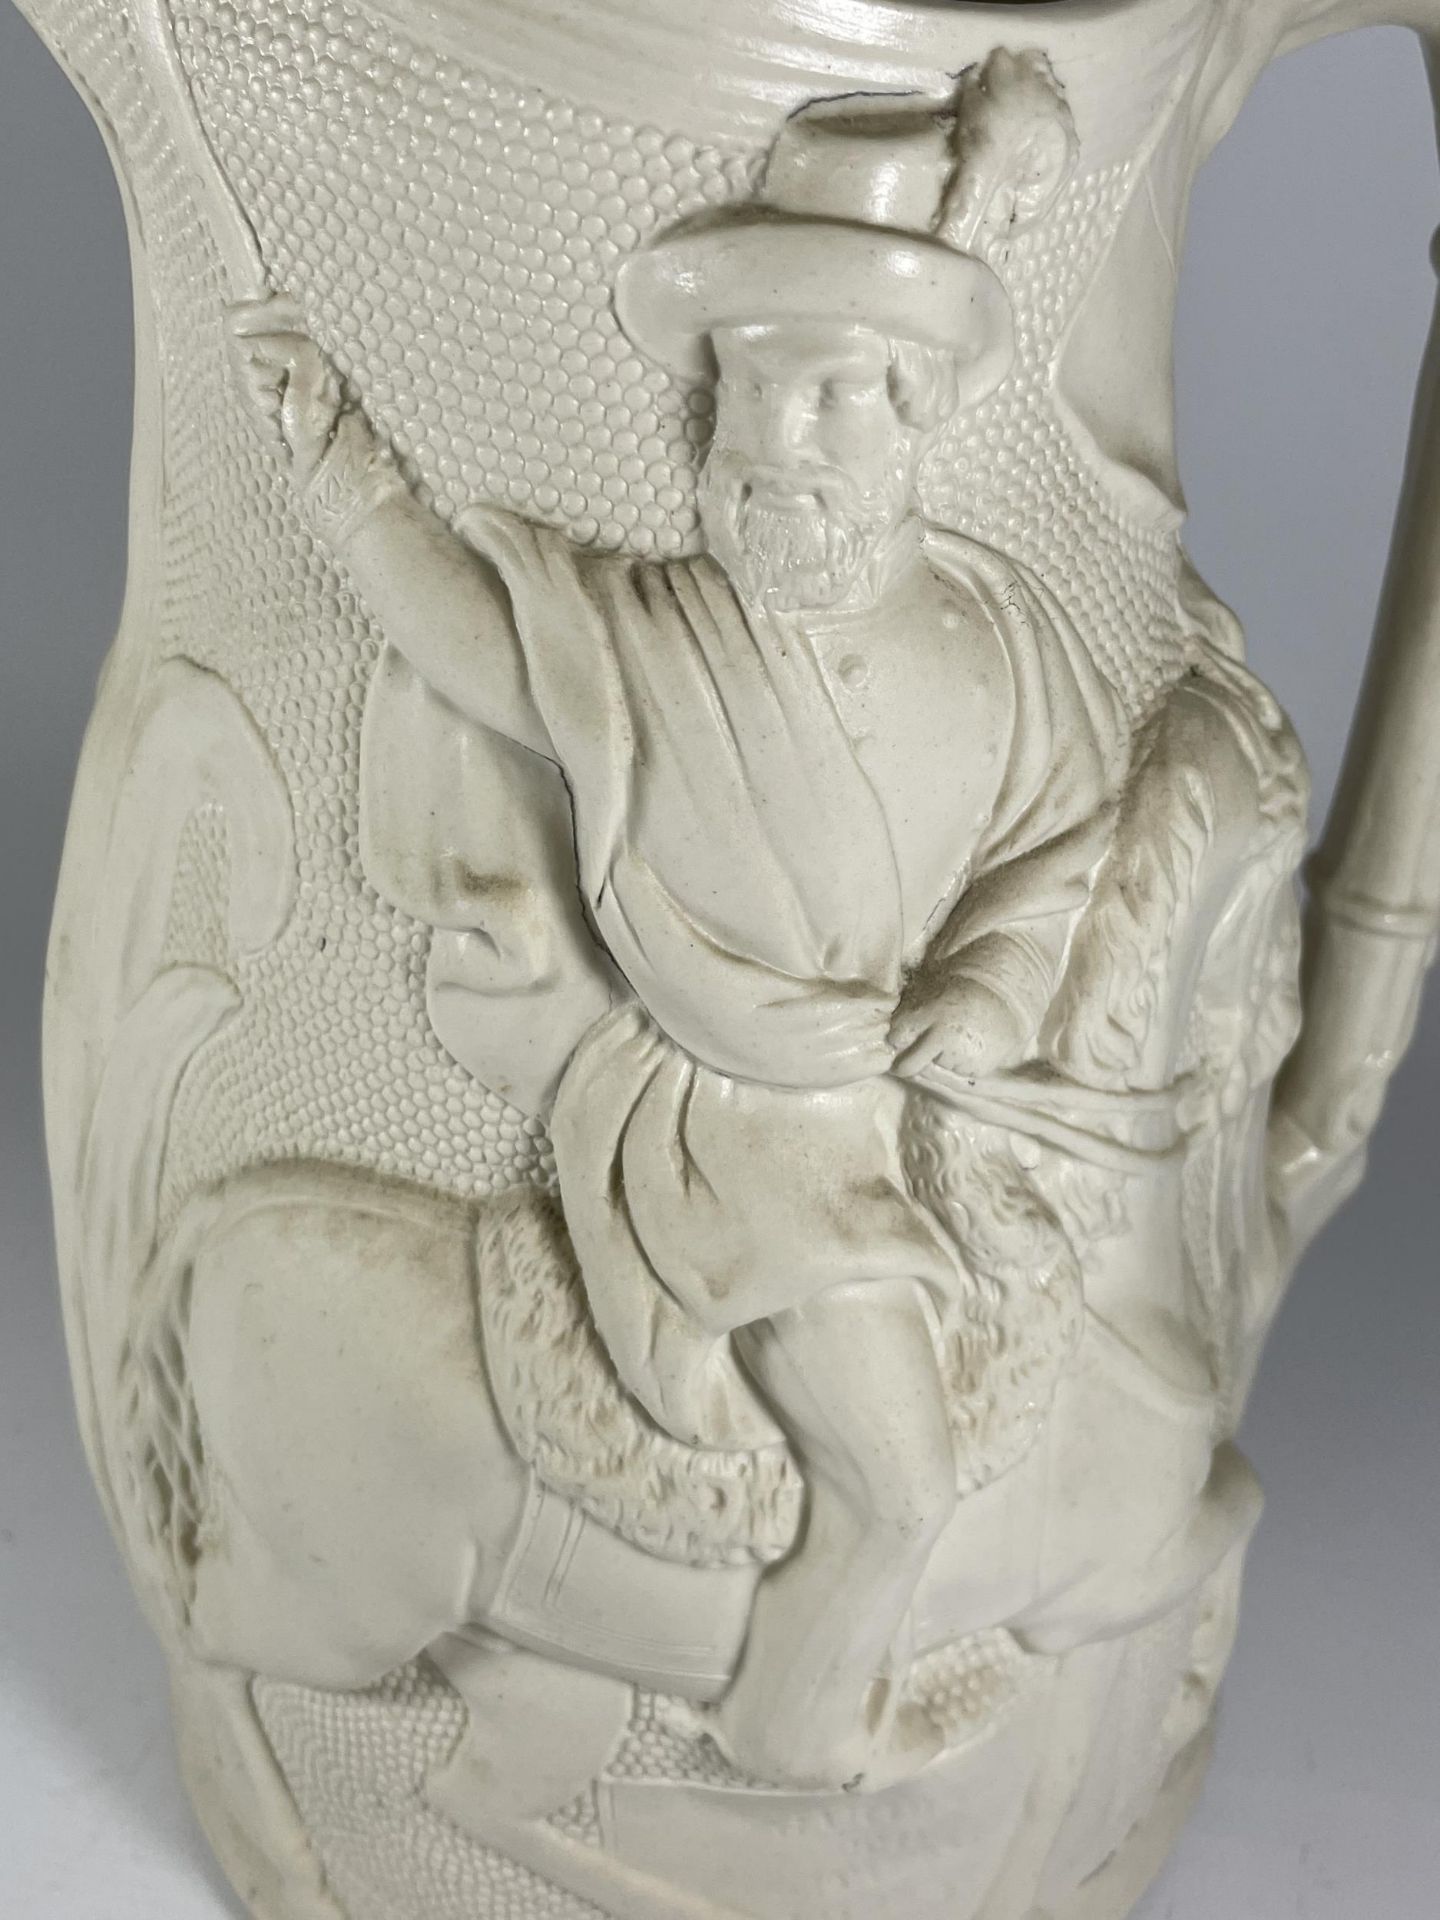 A LARGE PARIAN STYLE POTTERY JUG OF A MAN ON HORSEBACK, HEIGHT 31CM - Image 2 of 4